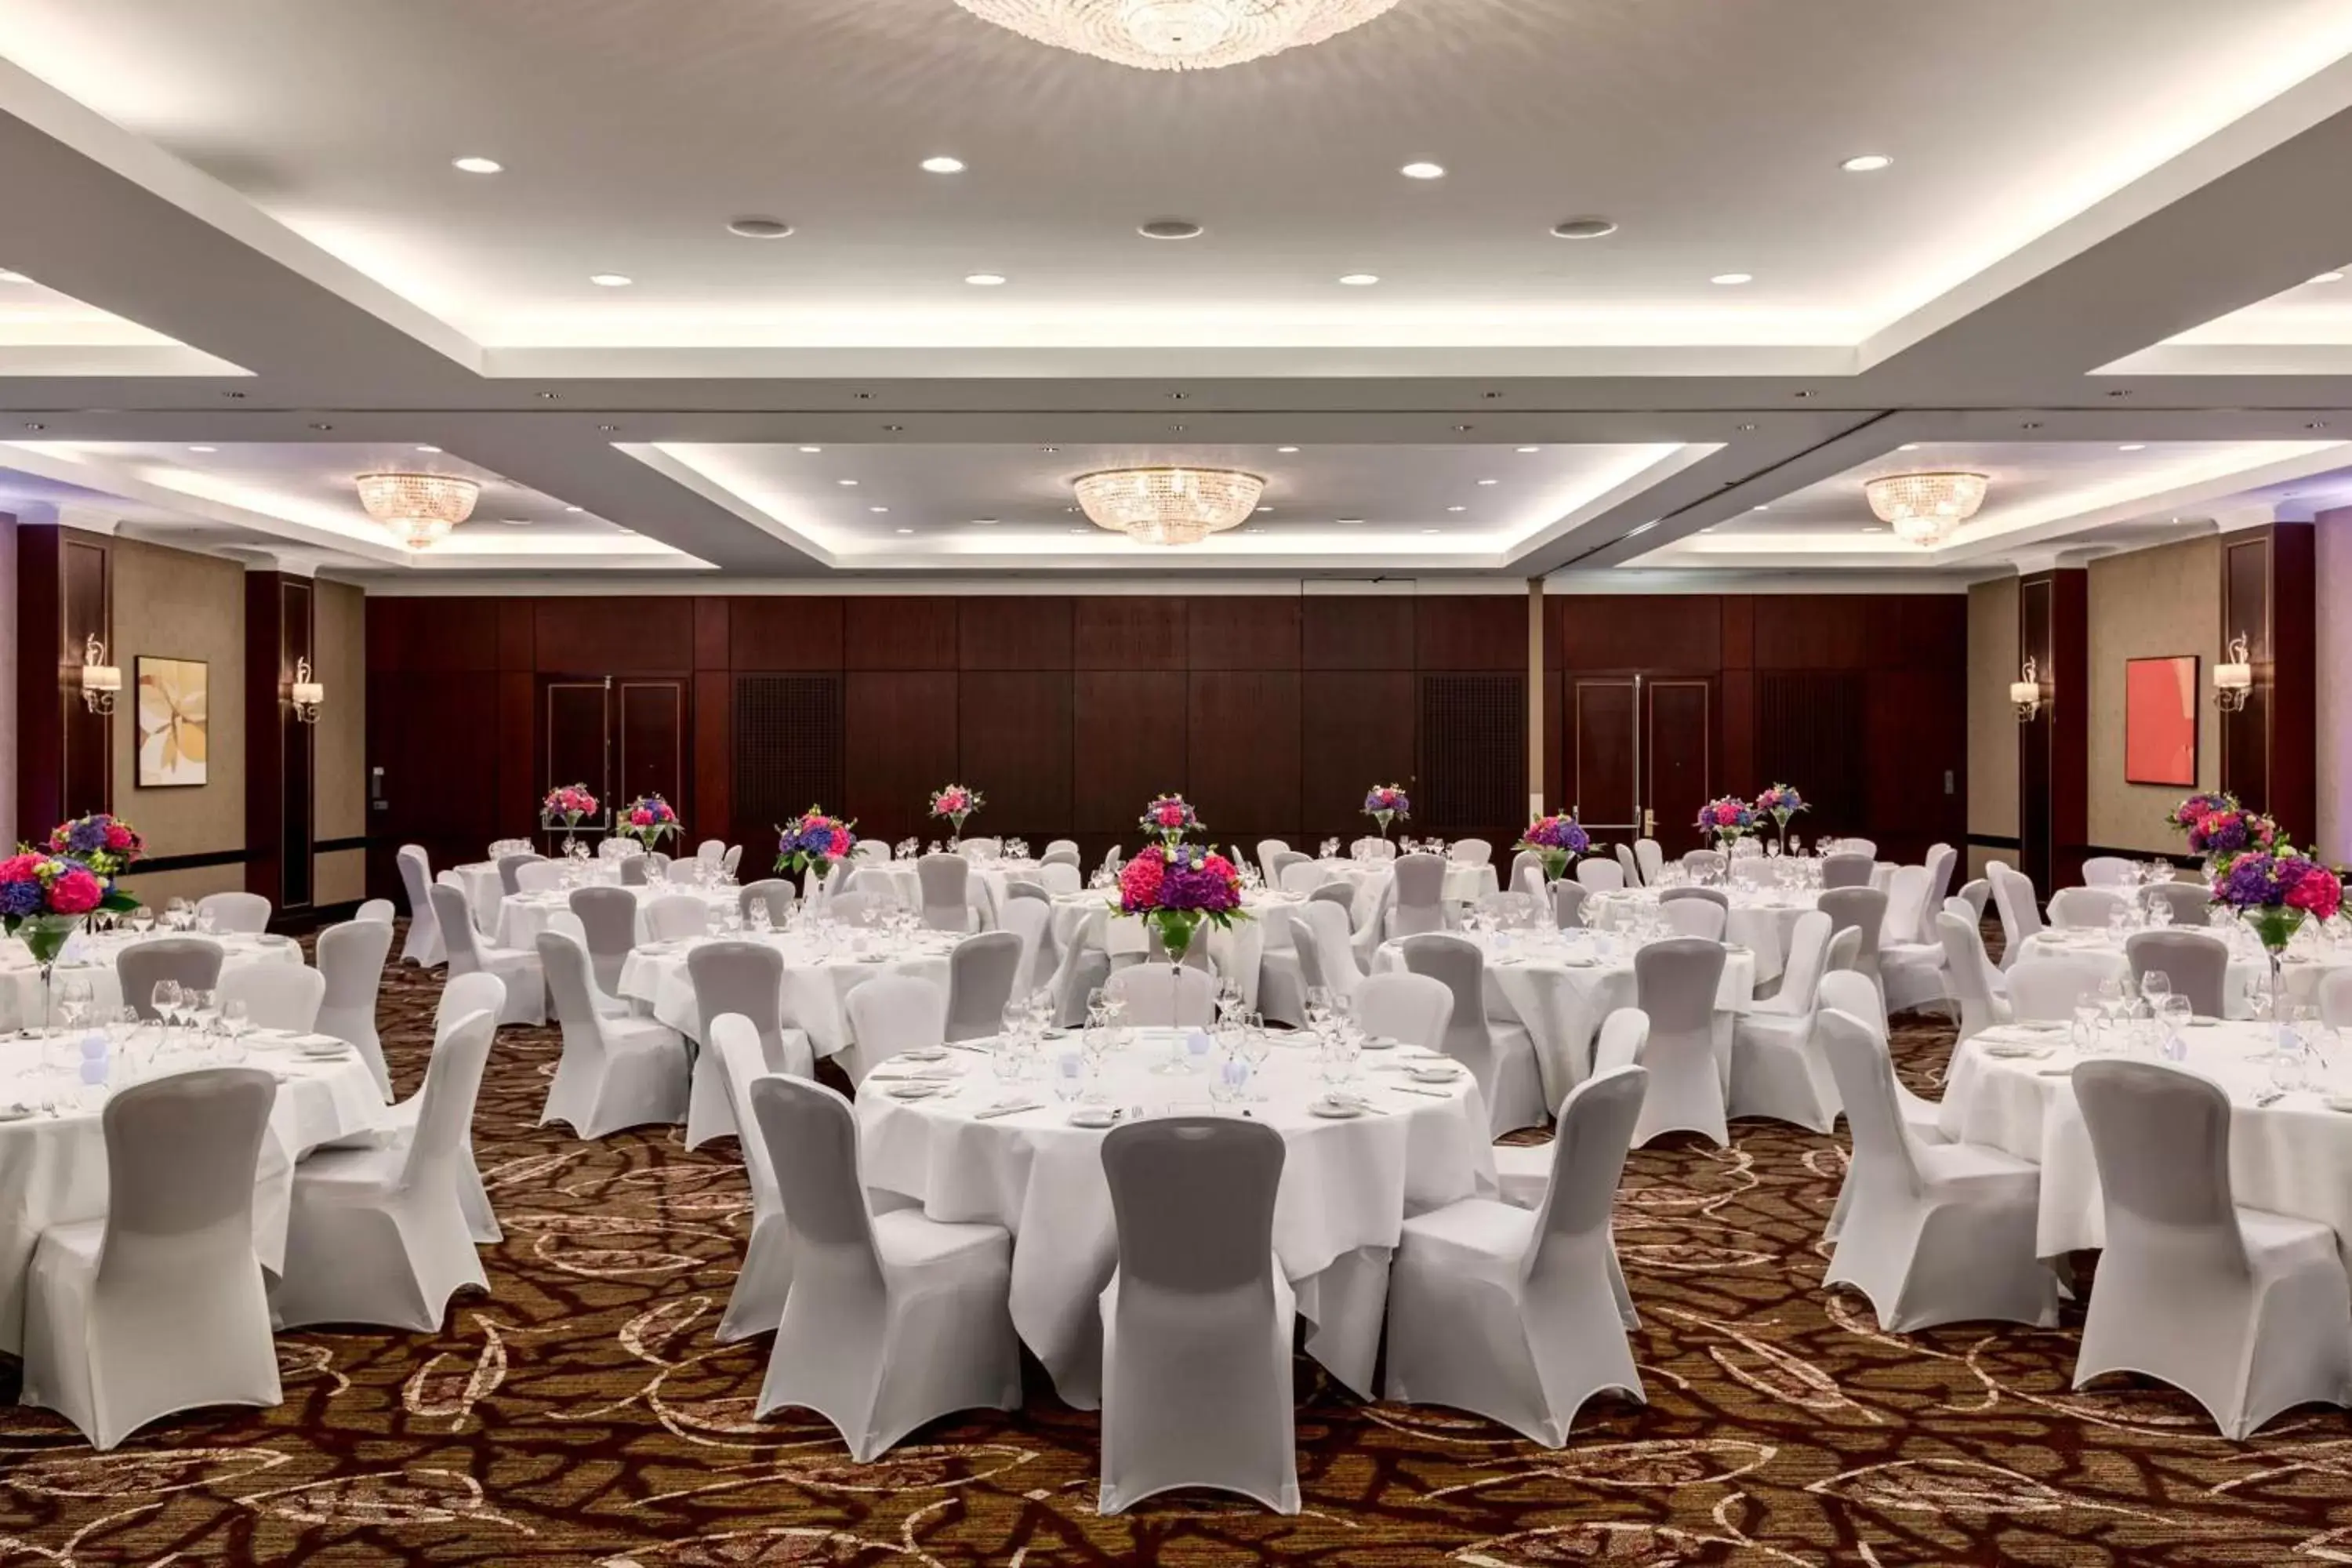 Banquet/Function facilities, Banquet Facilities in Brussels Marriott Hotel Grand Place